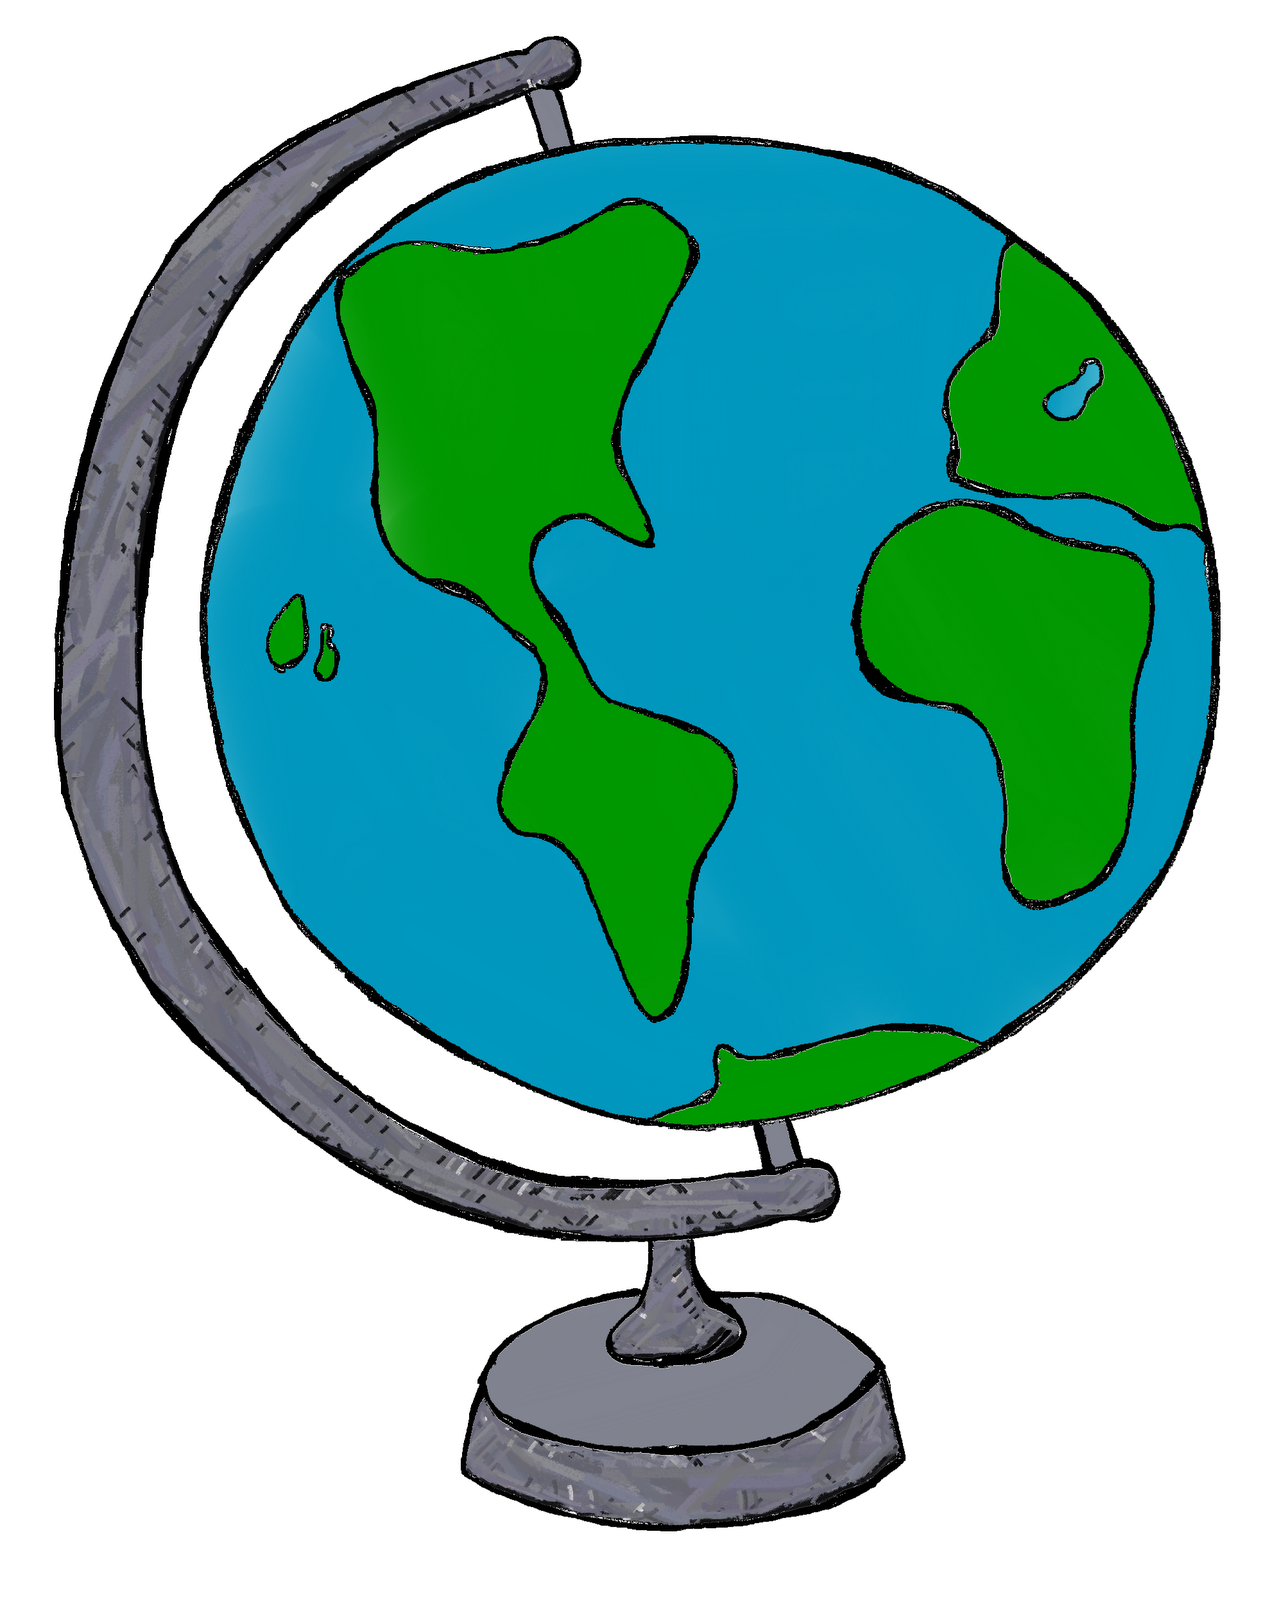 free clipart earth black and white - photo #40